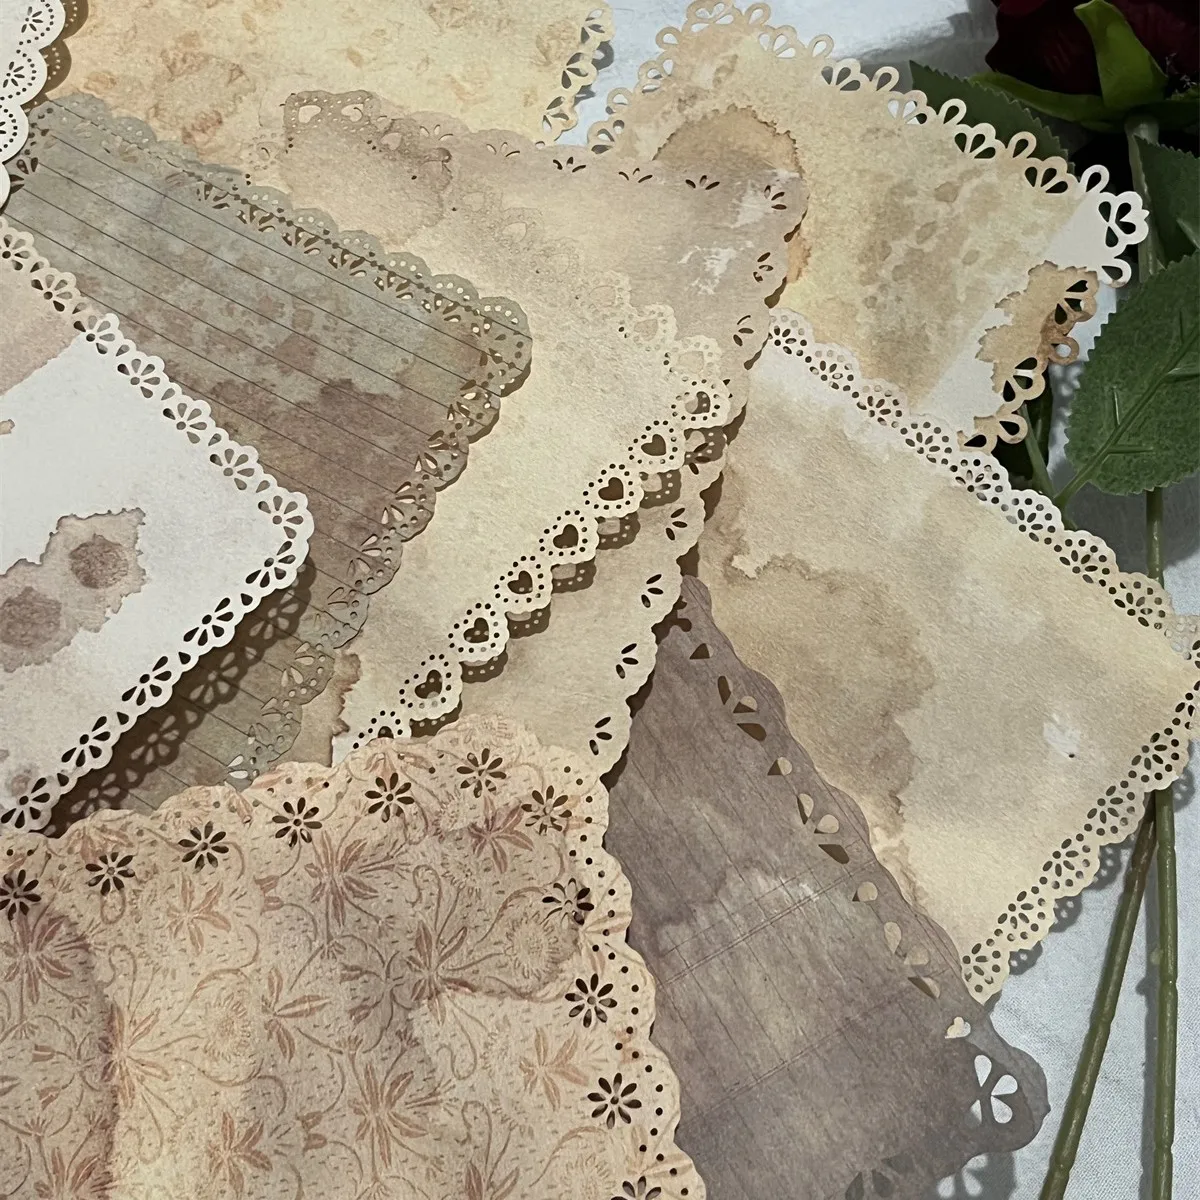 

Large Size Retro Material Paper Hollow Edge Lace Frame Paper Coffee Memo Pad Deco Scrapbooking Journaling Craft Vintage Papers